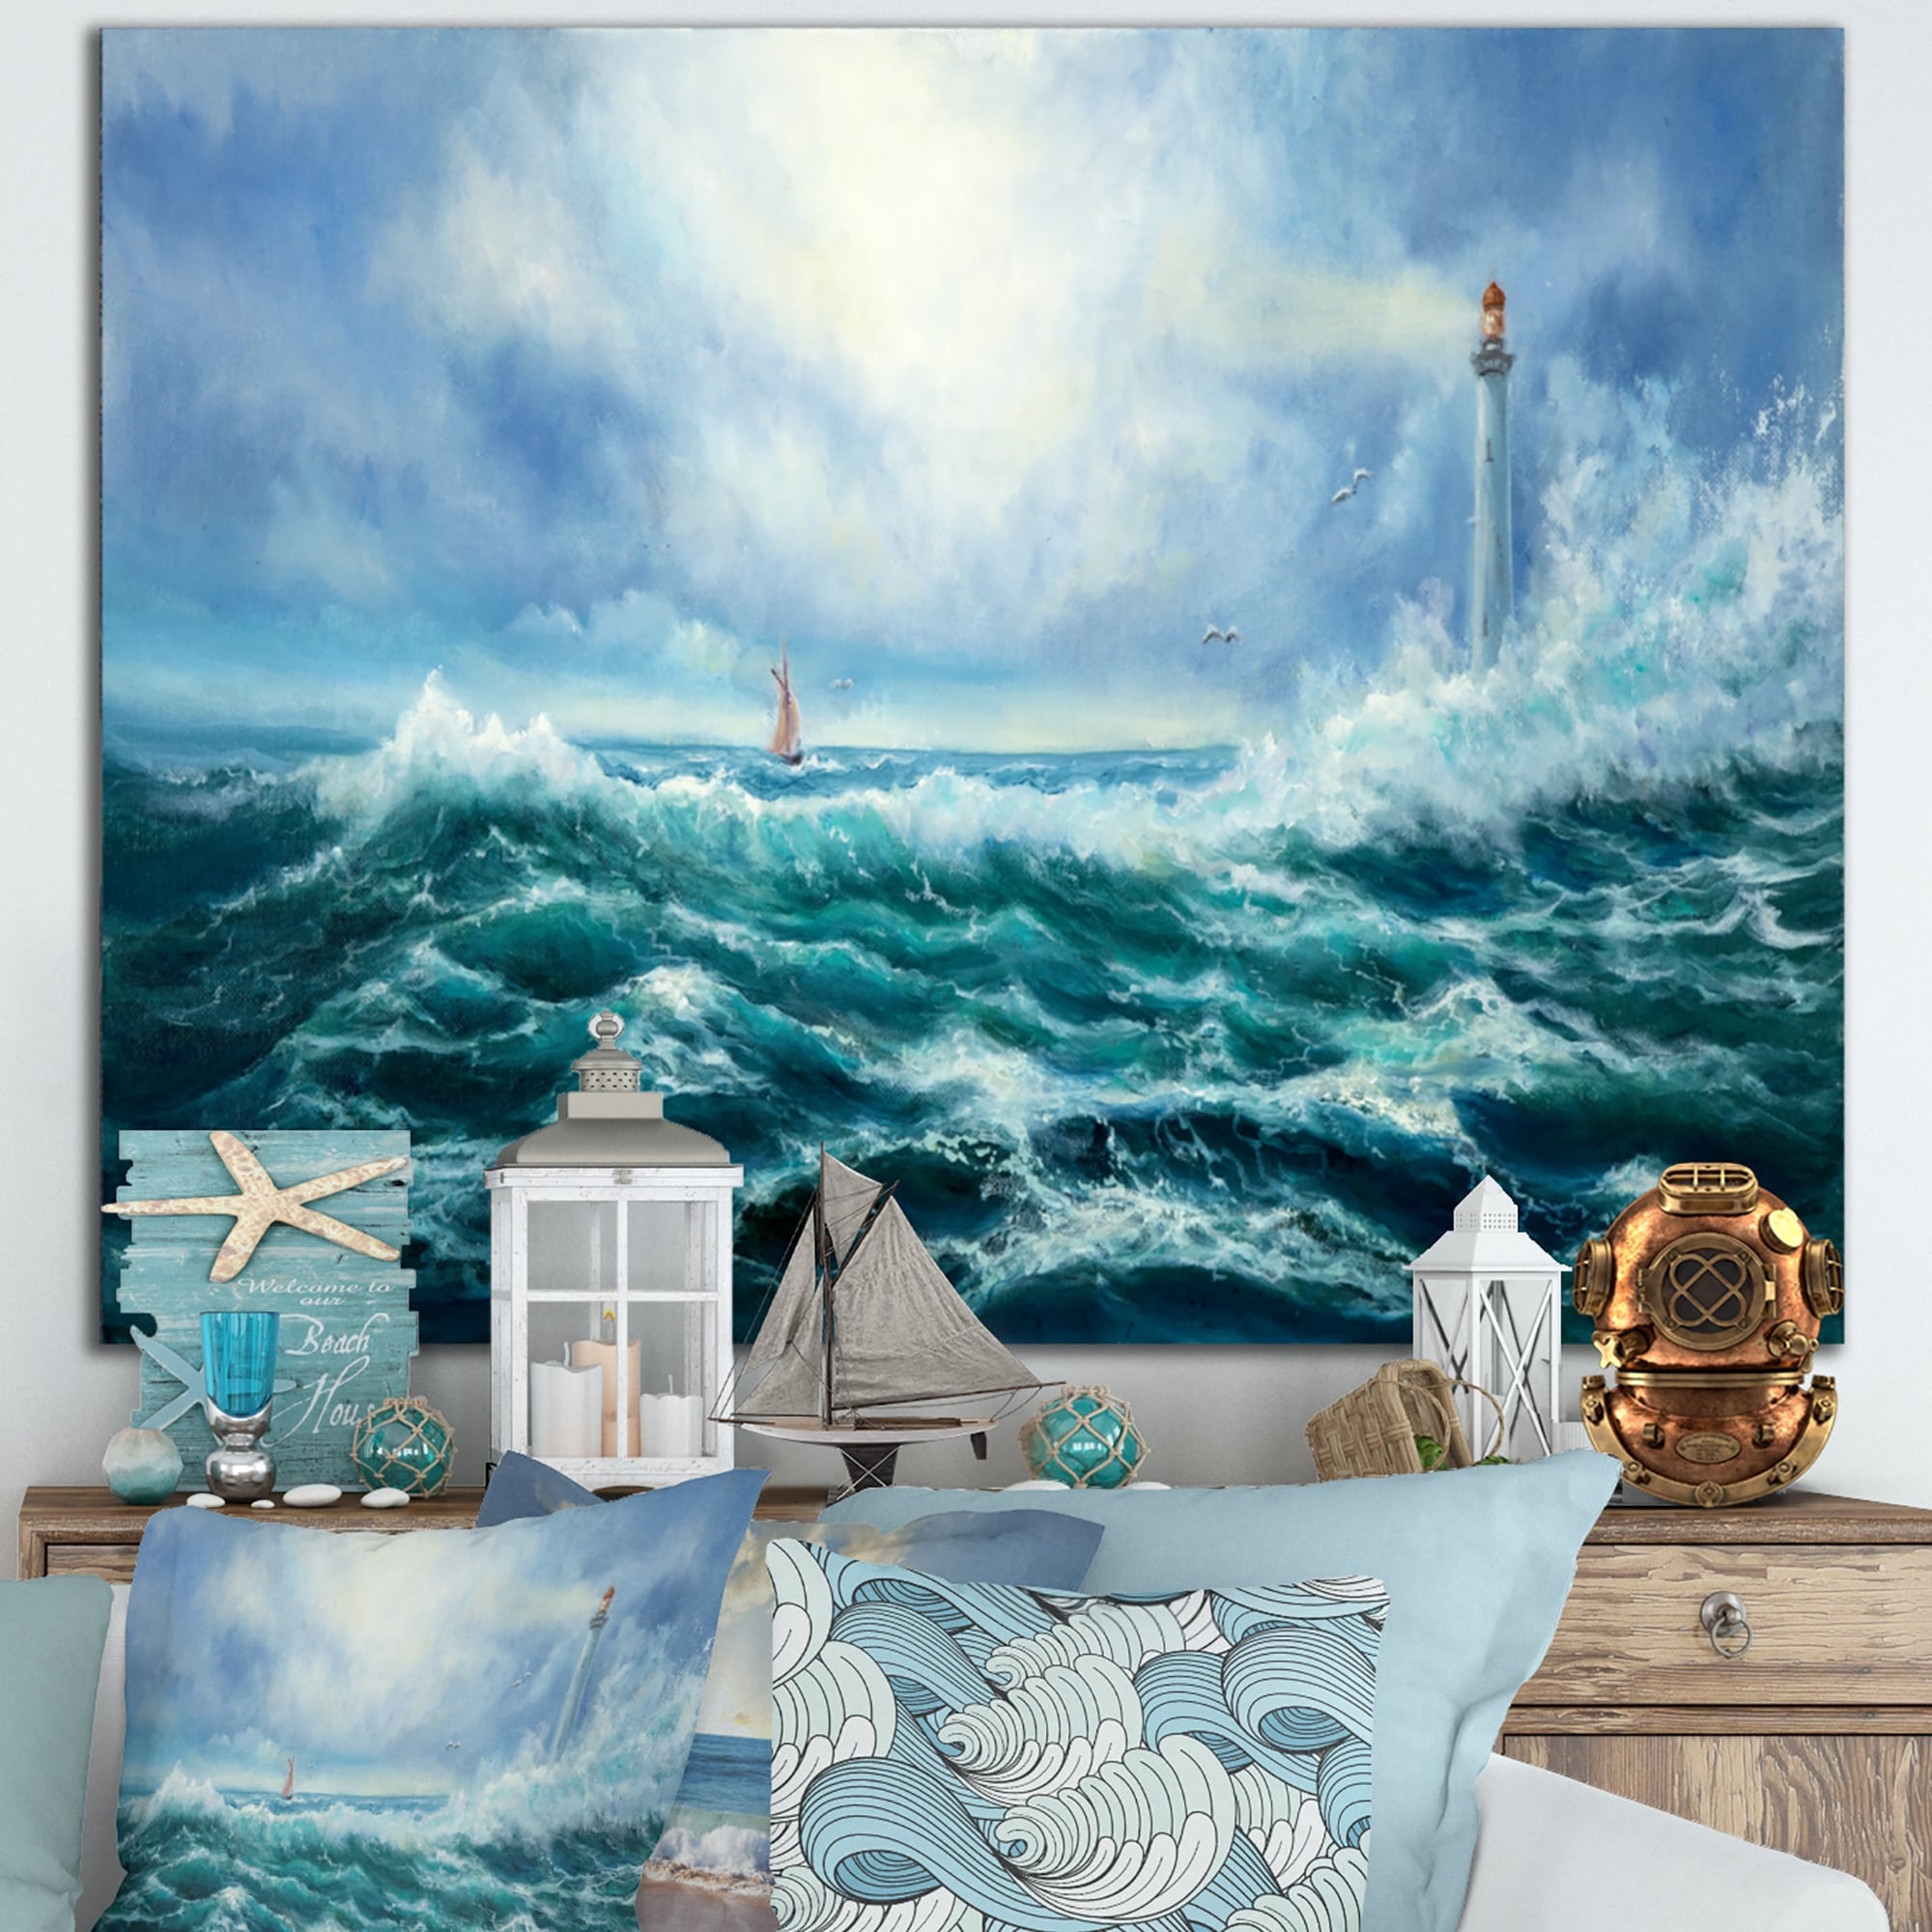 https://ak1.ostkcdn.com/images/products/is/images/direct/5a891397ca9e9ece2928e766290b55be39cac065/Designart-%27Lighthouse-In-Middle-Of-Blue-Wild-Ocean-Waves%27-Nautical-%26-Coastal-Canvas-Wall-Art-Print.jpg